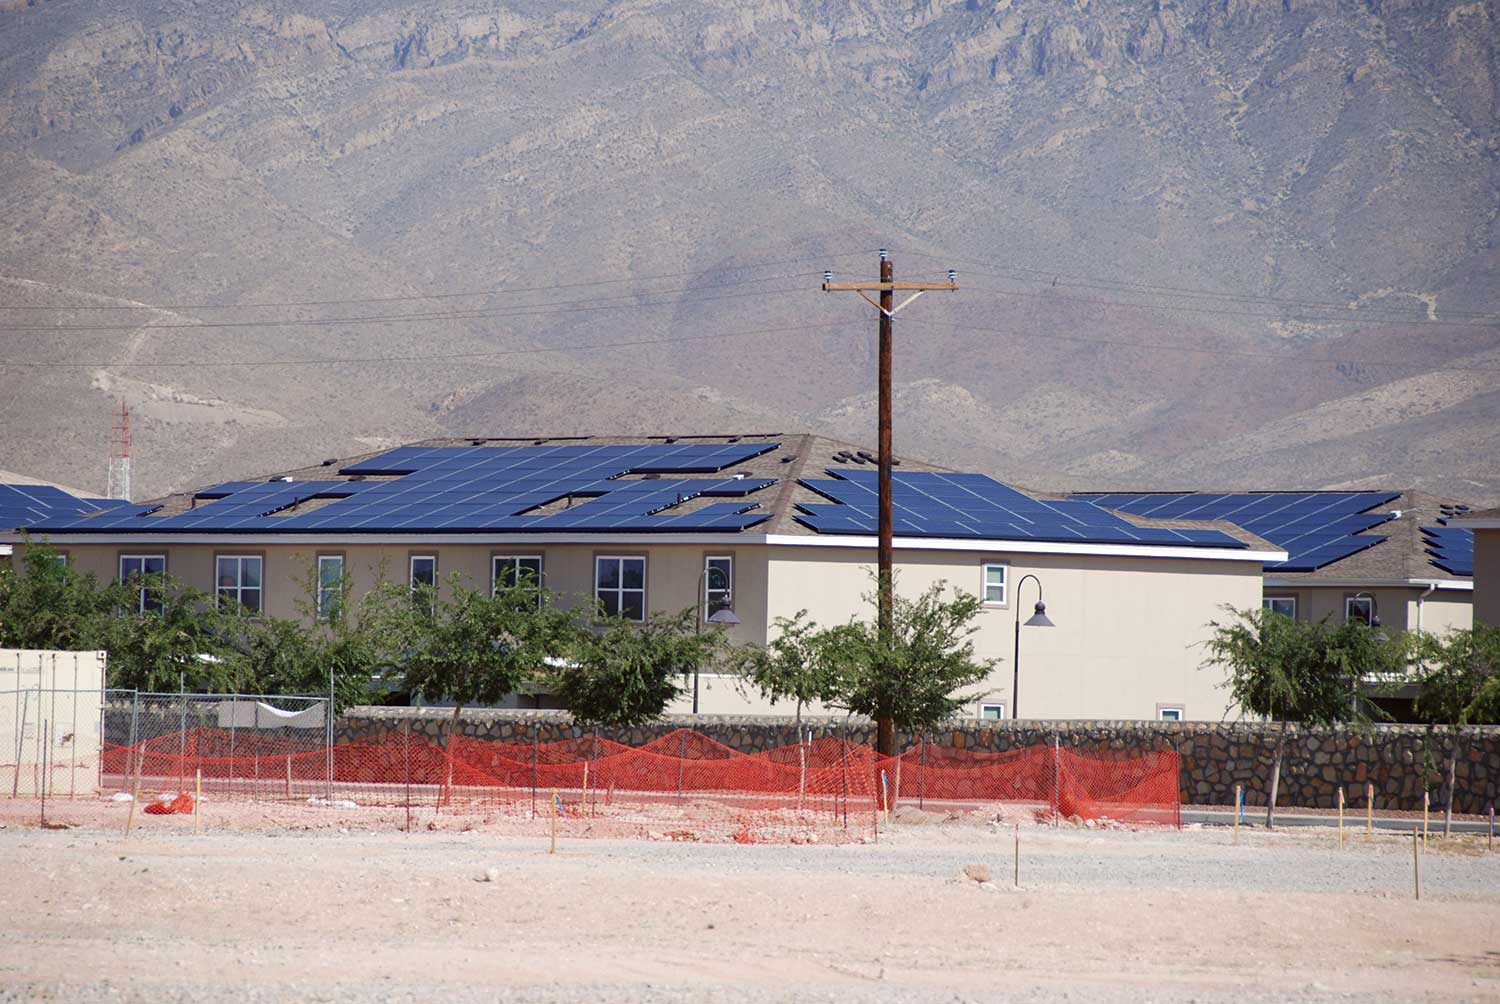 PV system on roof in desert climate. National Electrical Code and PV systems